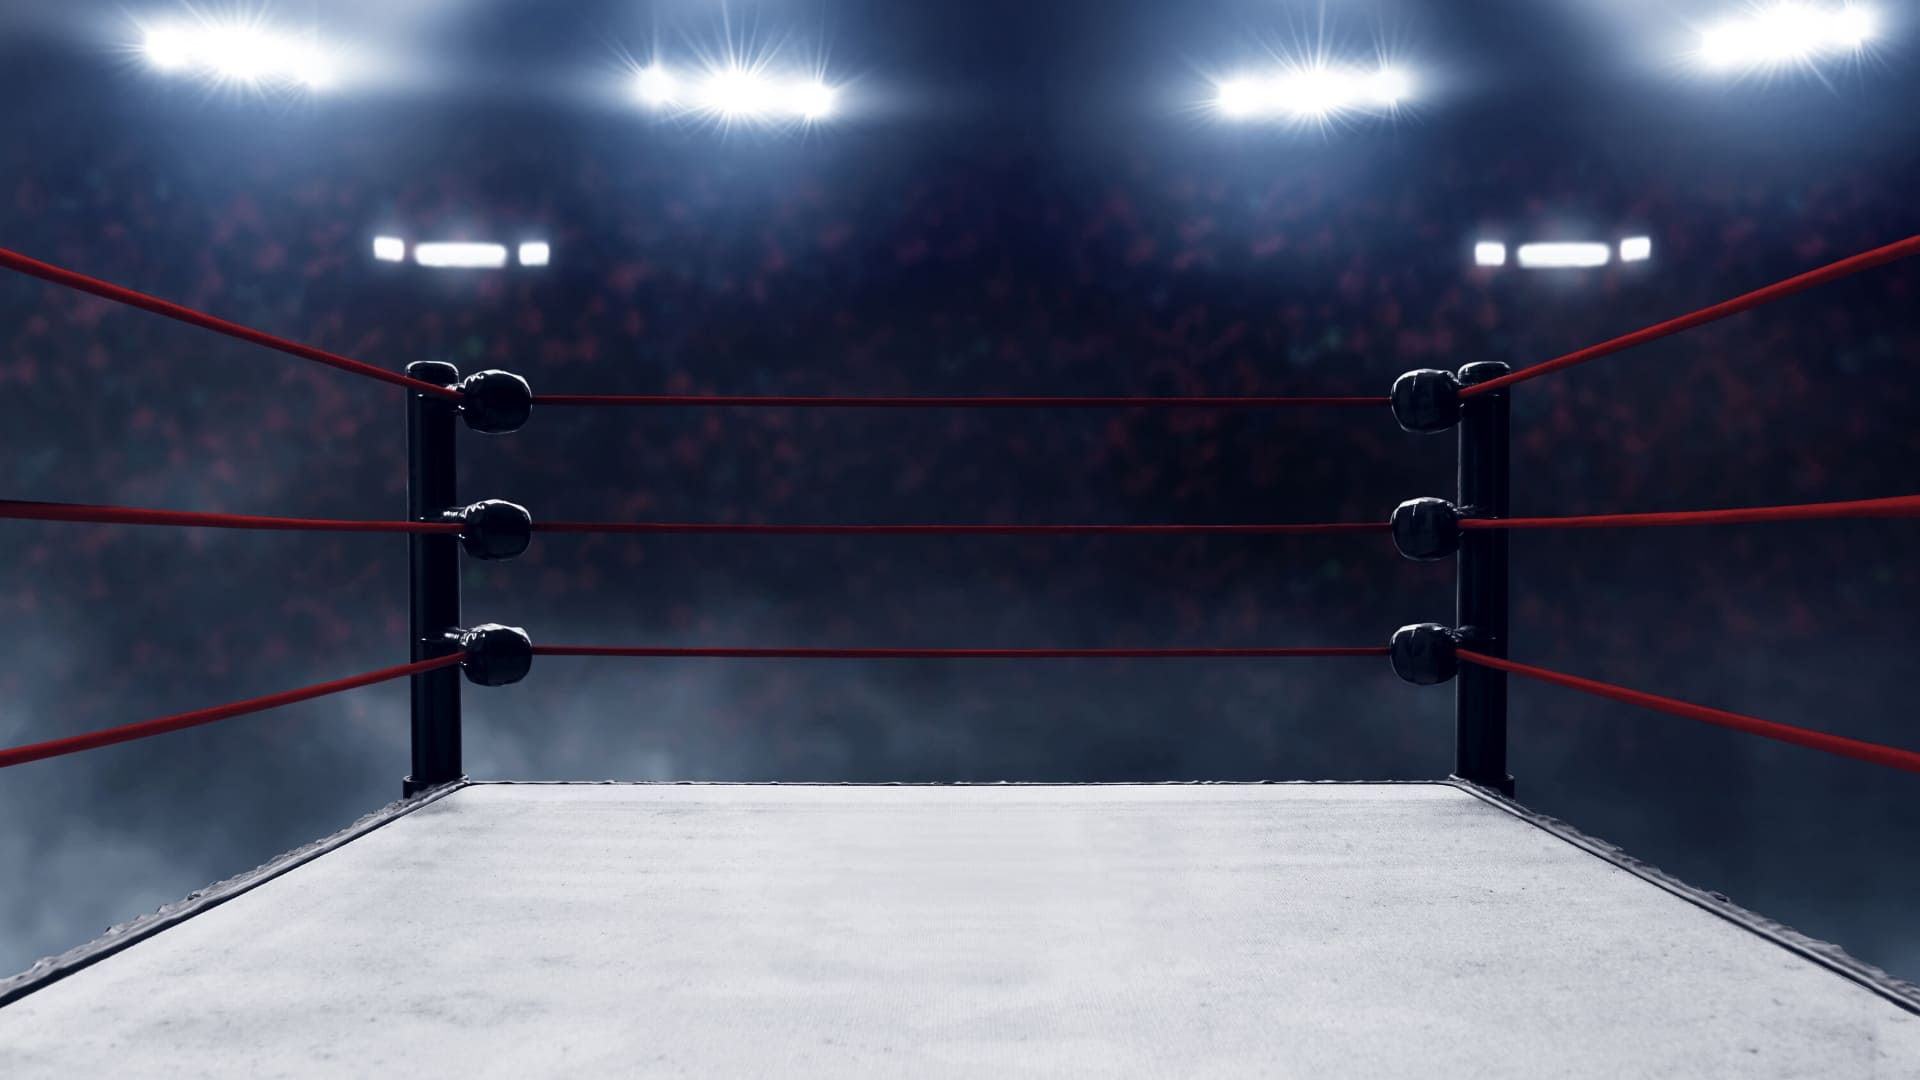 1920x1080 Boxing Ring Desktop Wallpaper posted by Ryan Thomps